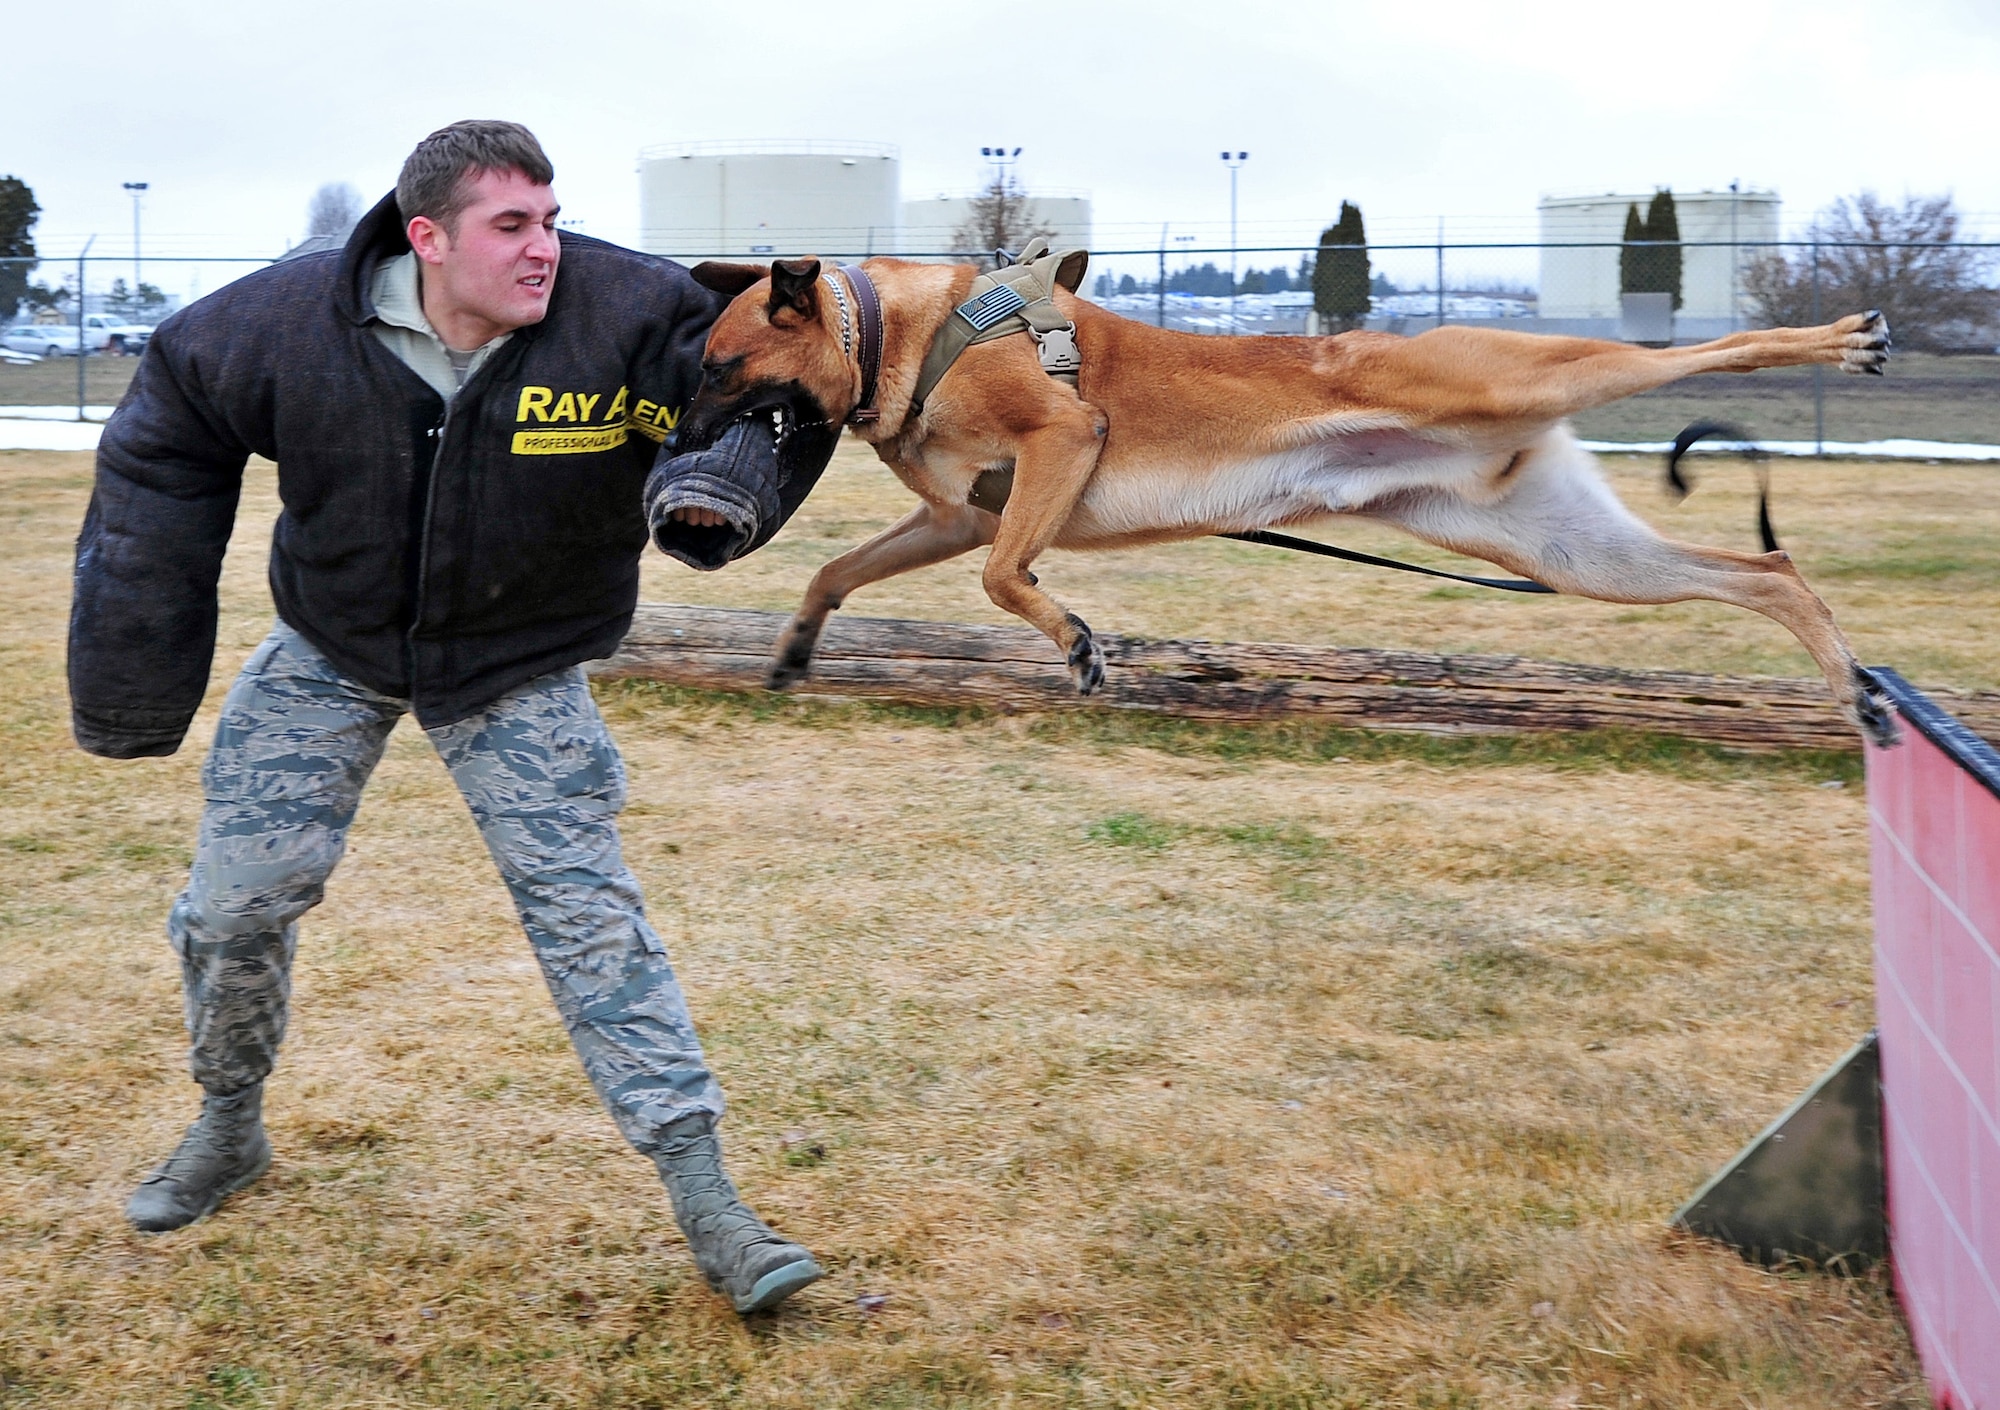 Uutah leaps over a hurdle to take down a simulated aggressor at the K-9 confidence course at Fairchild Air Force Base, Wash., Feb. 28, 2013. The course is designed to keep the dogs proficiencies up. Uutah is a Belgian Malinois military working dog assigned to the 92nd Security Forces Squadron. (U.S. Air Force photo by Senior Airman Taylor Curry)